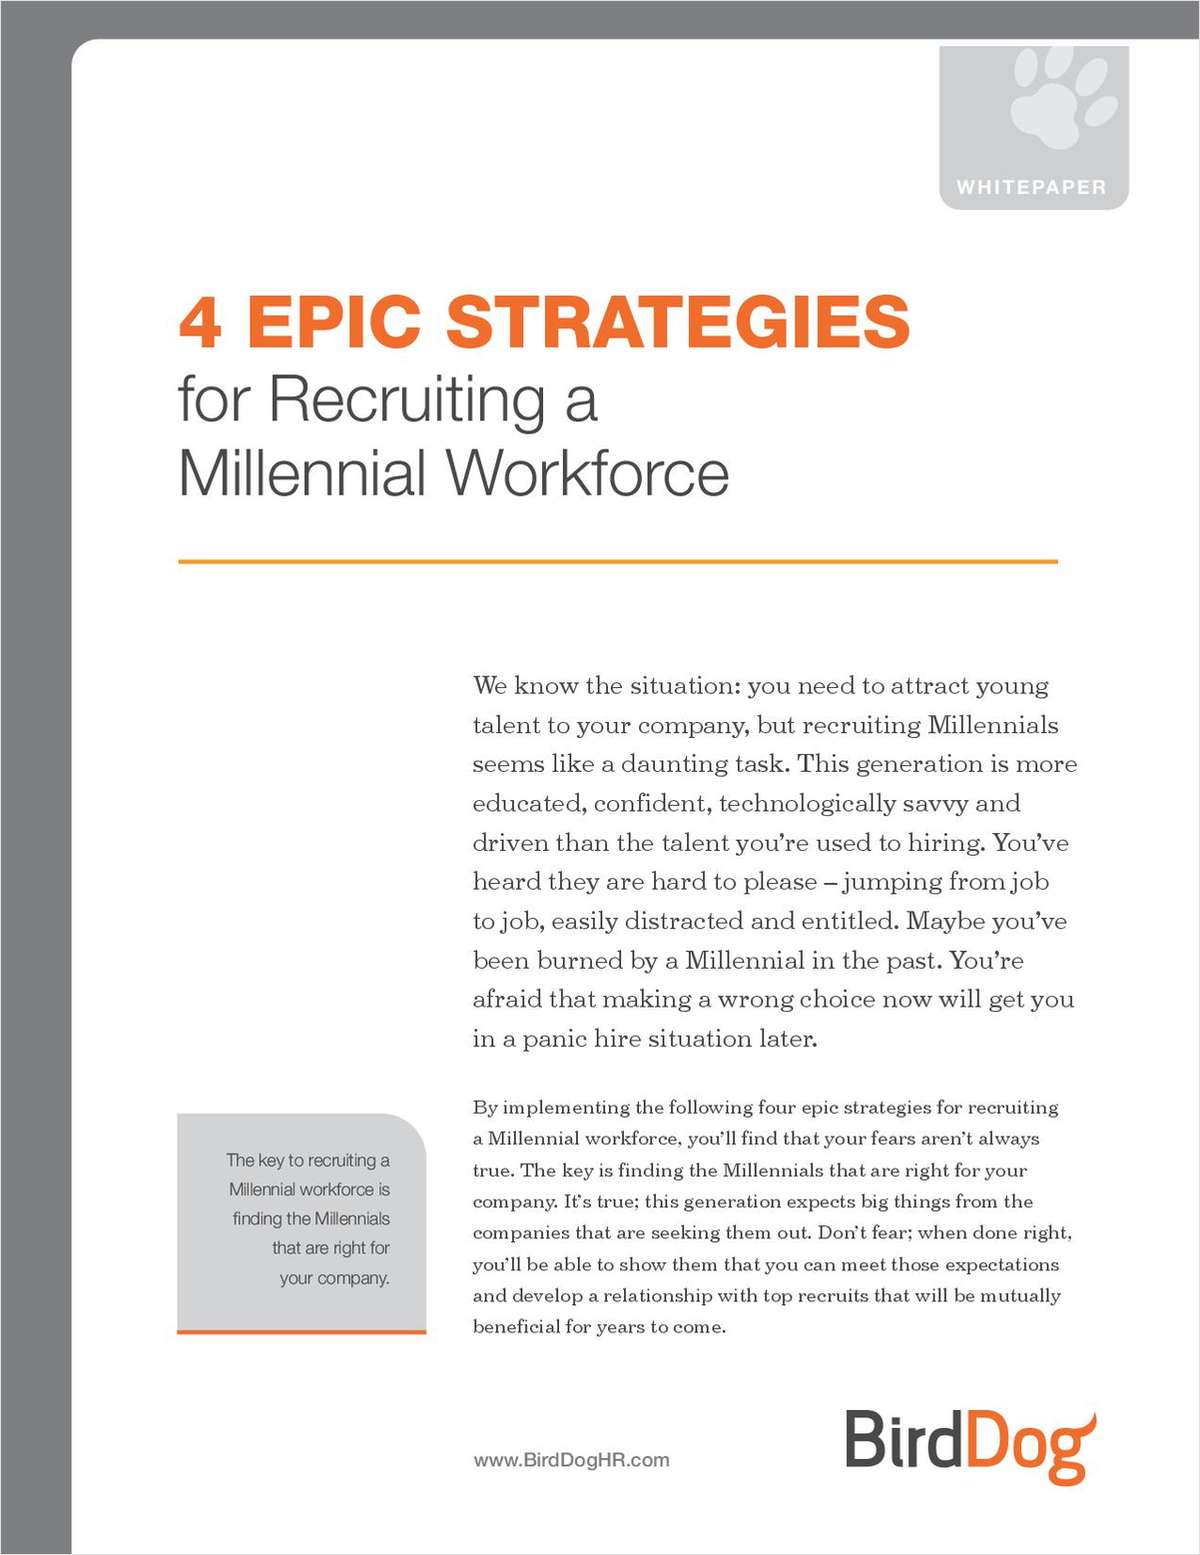 Epic Strategies for Recruiting a Millennial Workforce